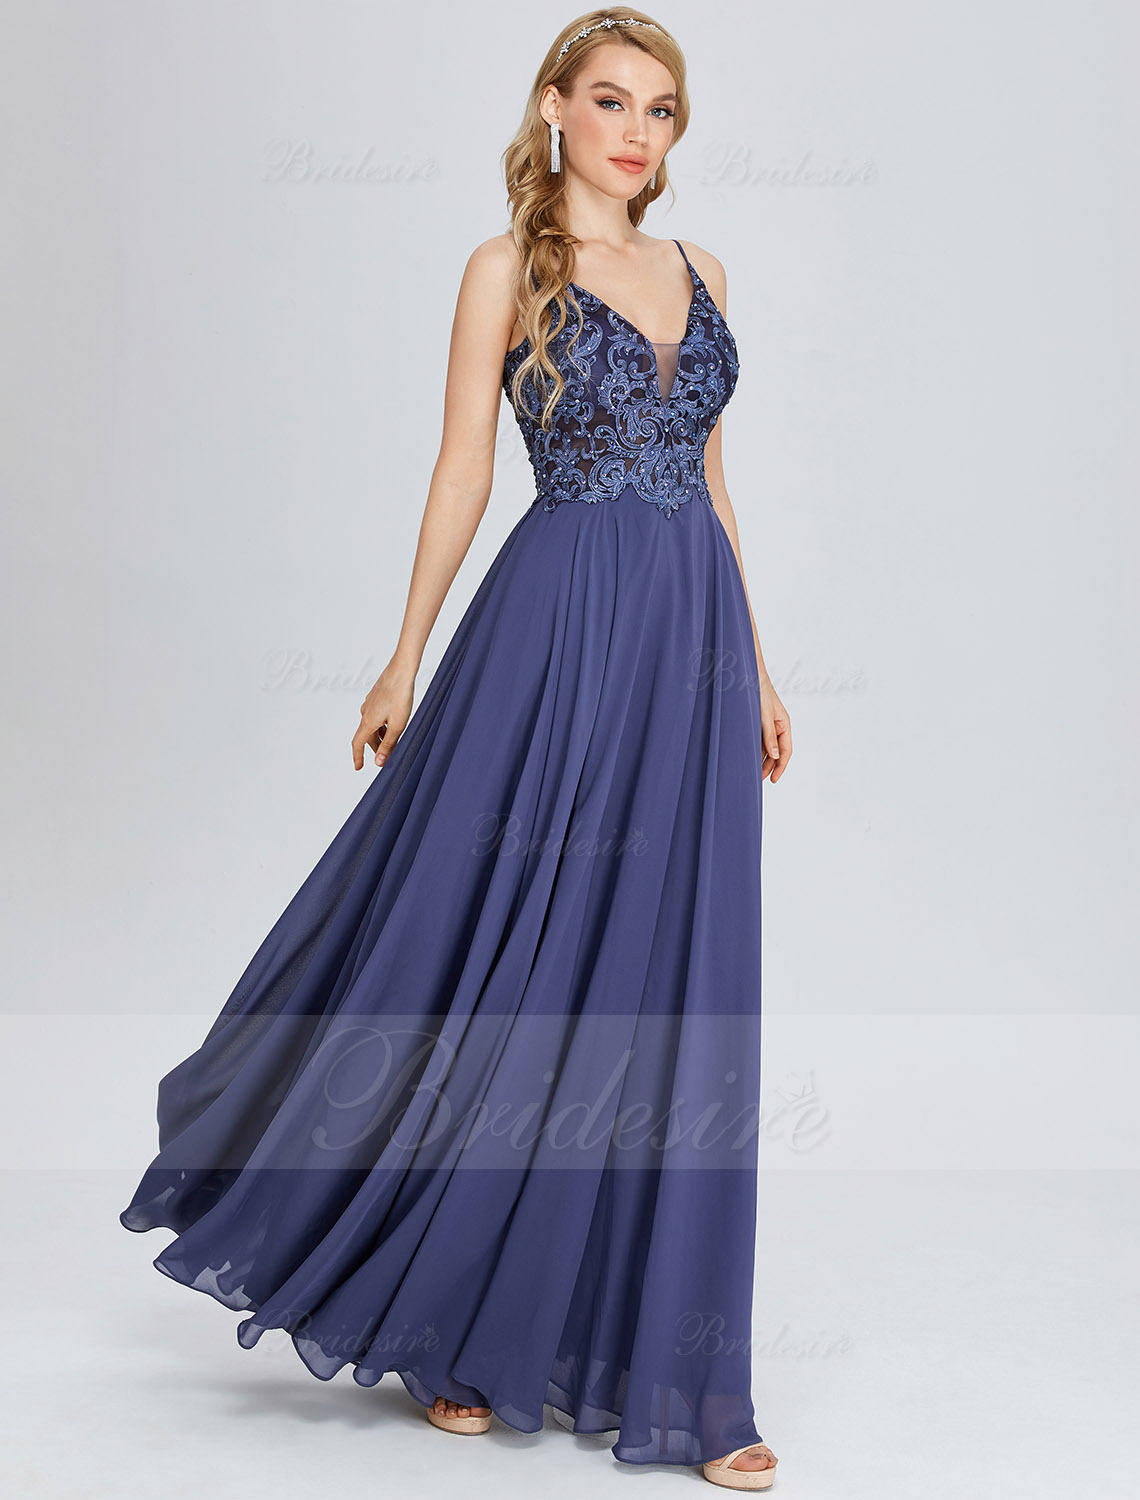 A-line V-neck Floor-length Chiffon Prom Dress with Lace